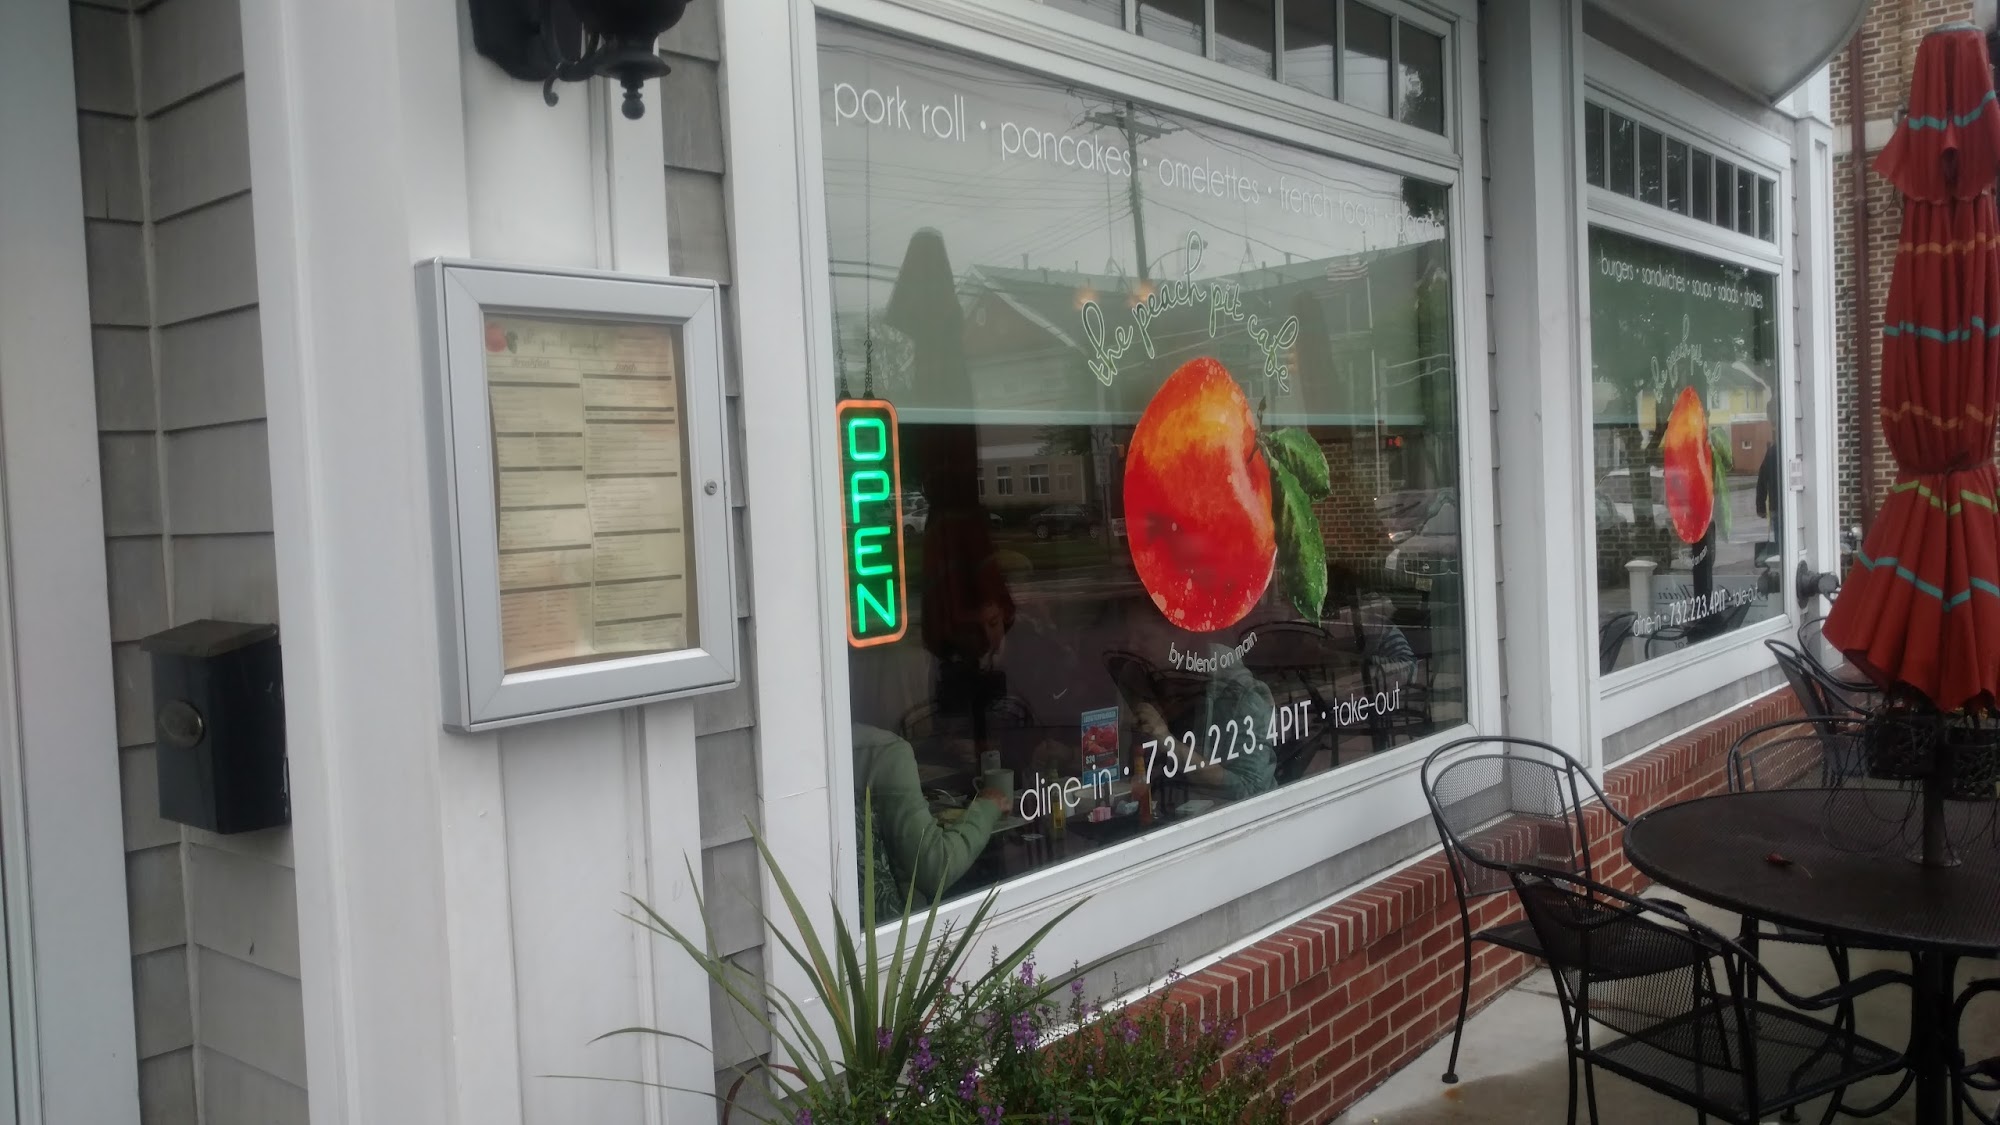 The Peach Pit Cafe